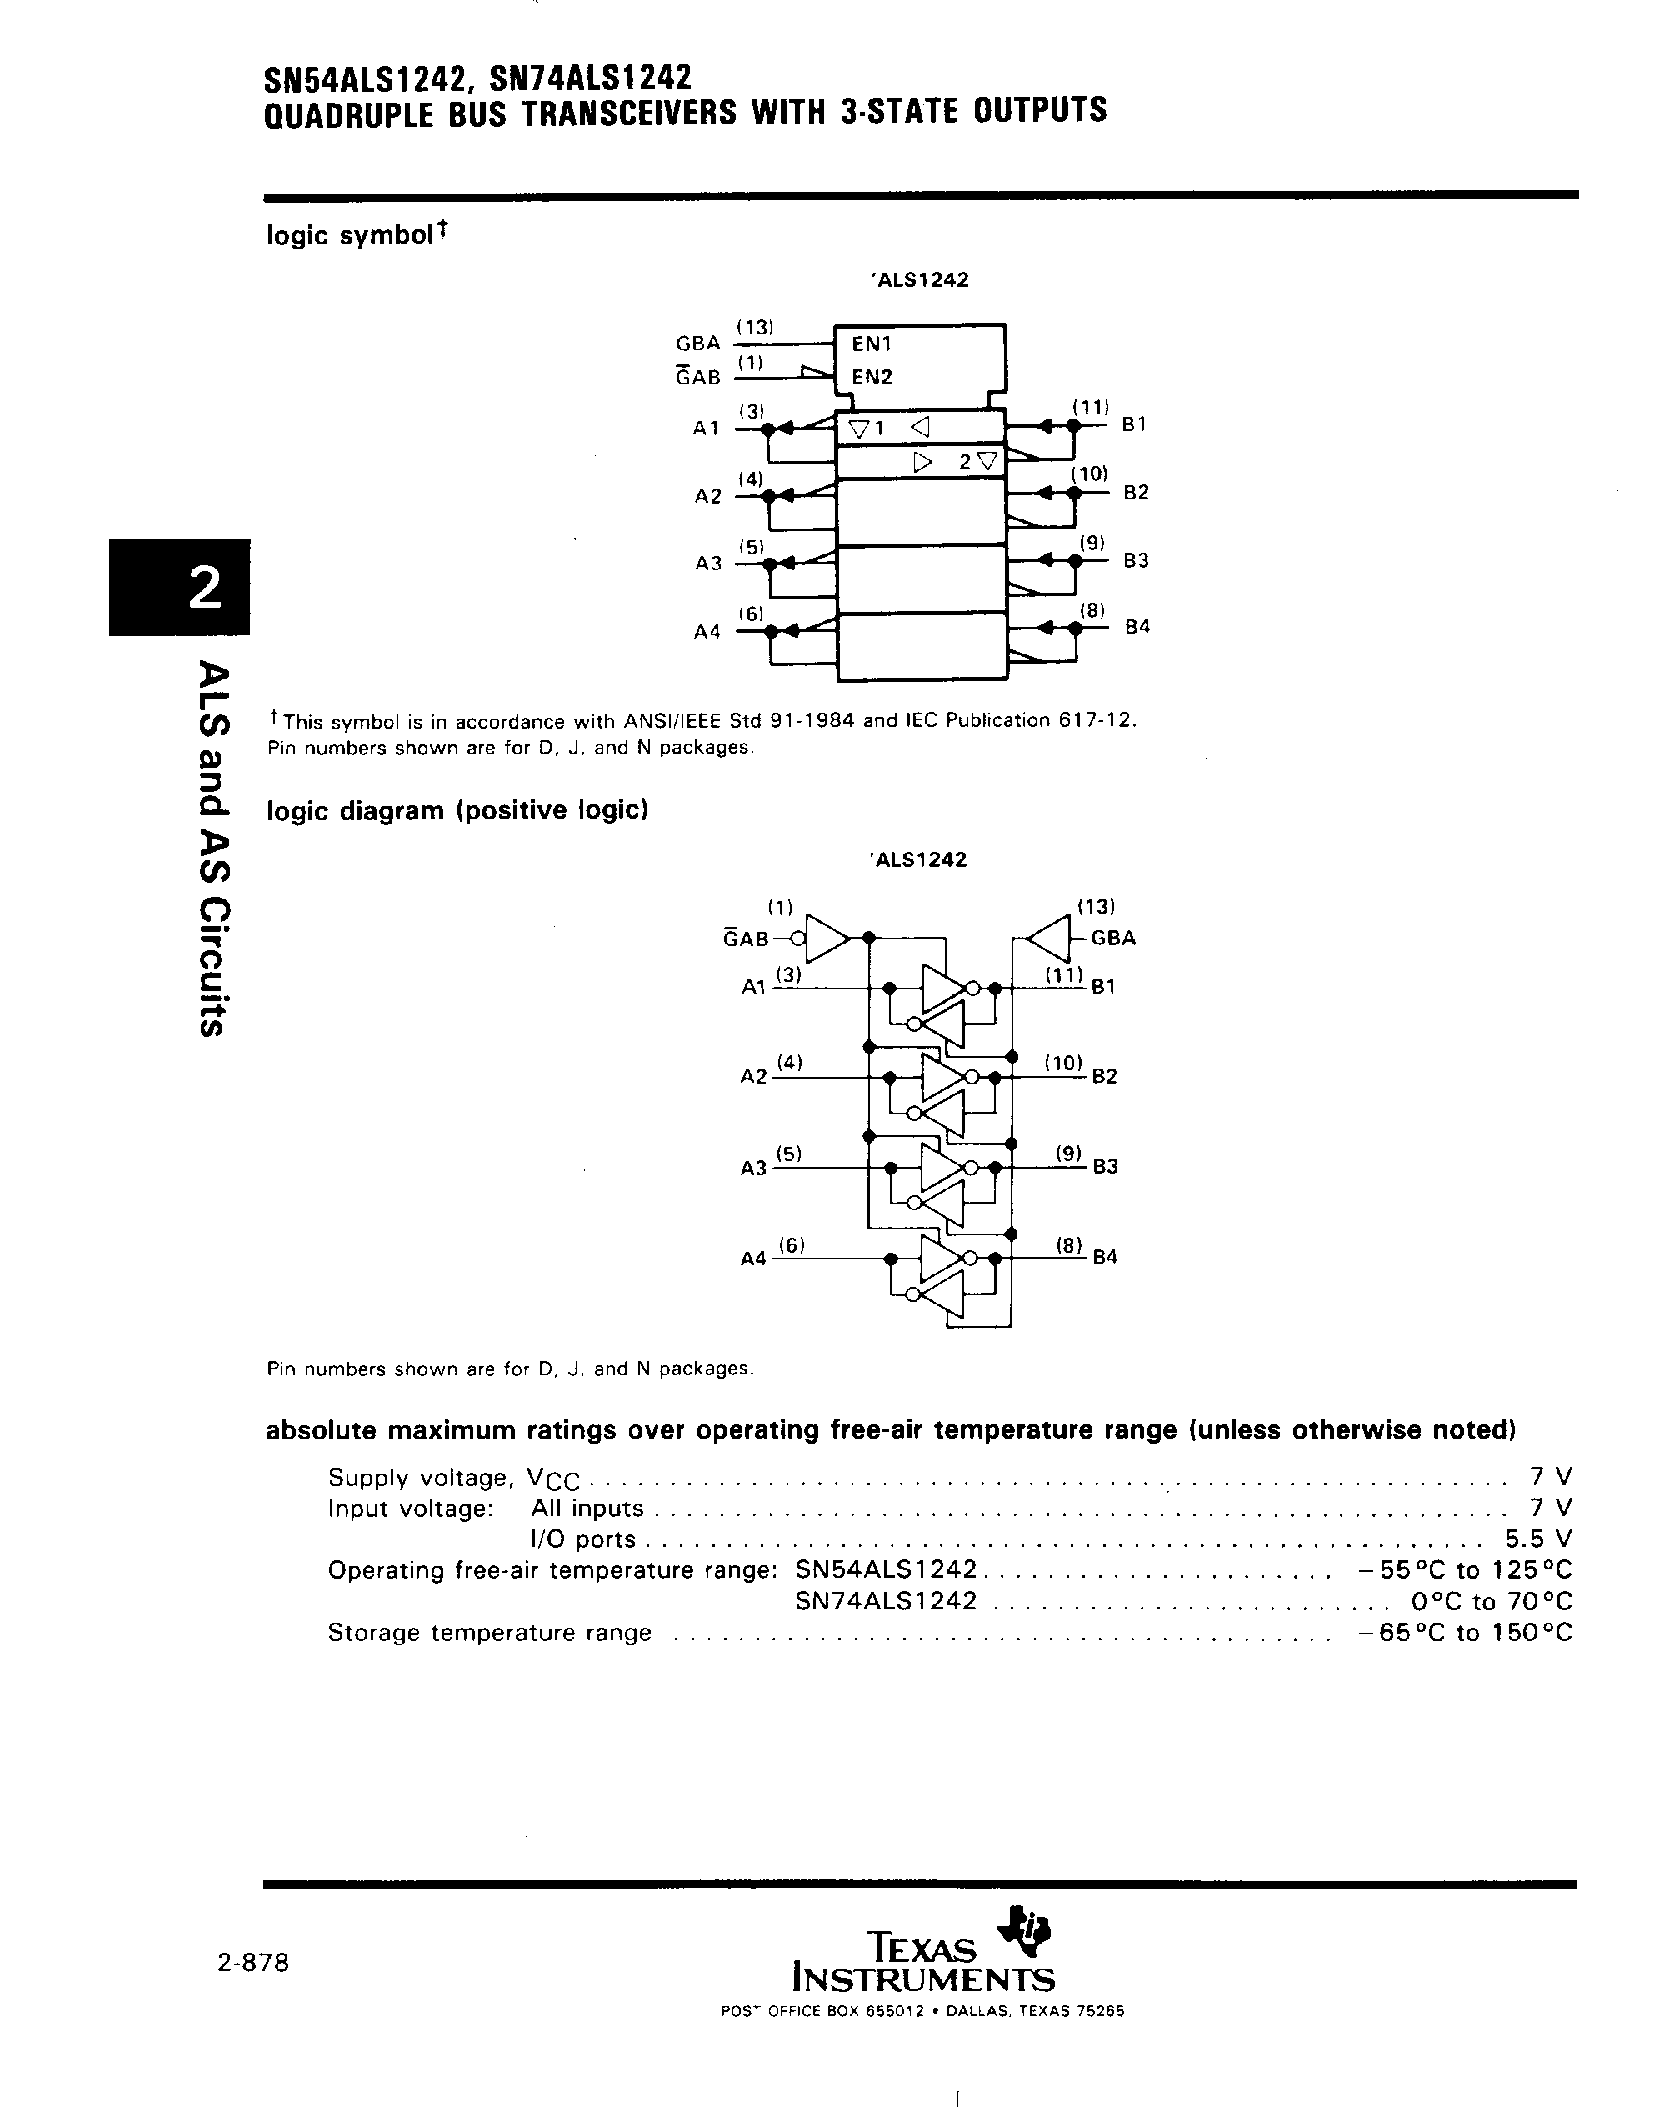 Datasheet SN74ALS1242 - Quadruple Bus Transceivers with 3 State Outputs page 2